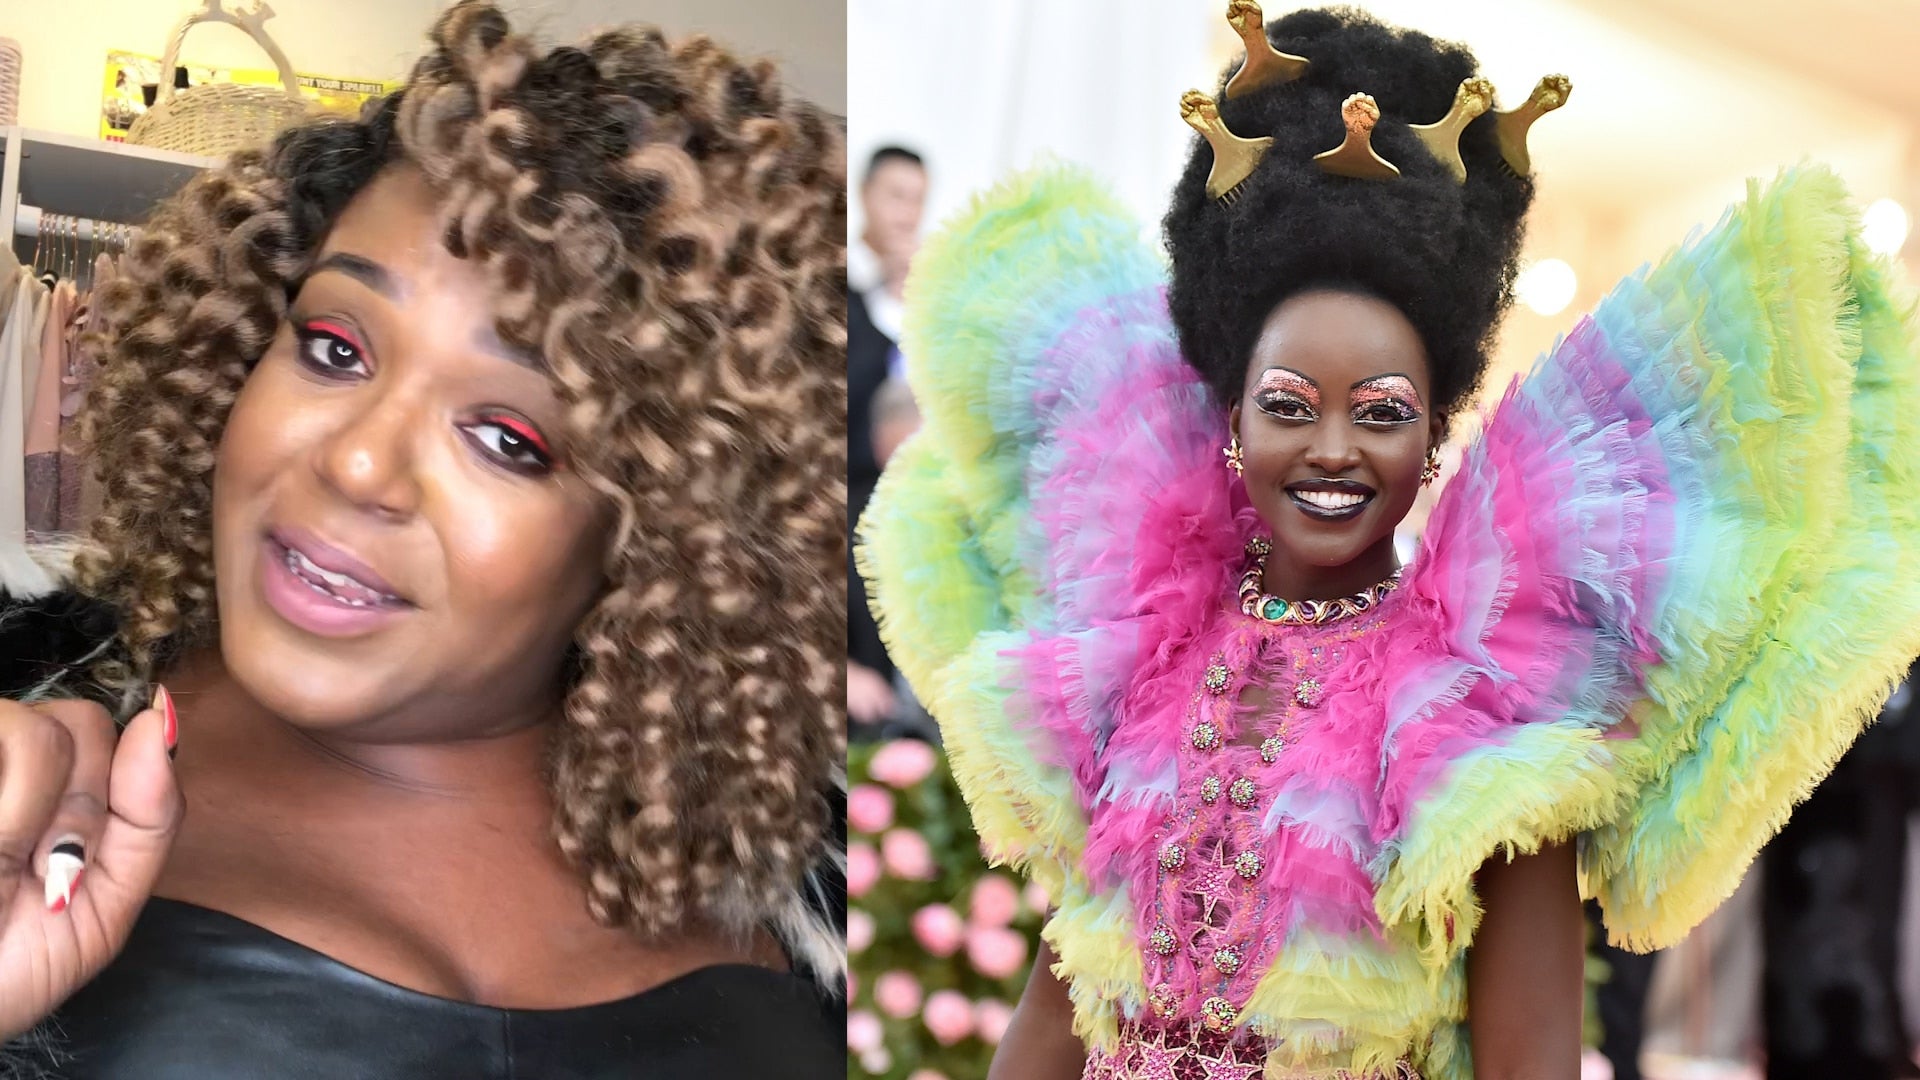 Watch 'The OverExplainer' React To The Met Gala's Good, Bad And Ugly